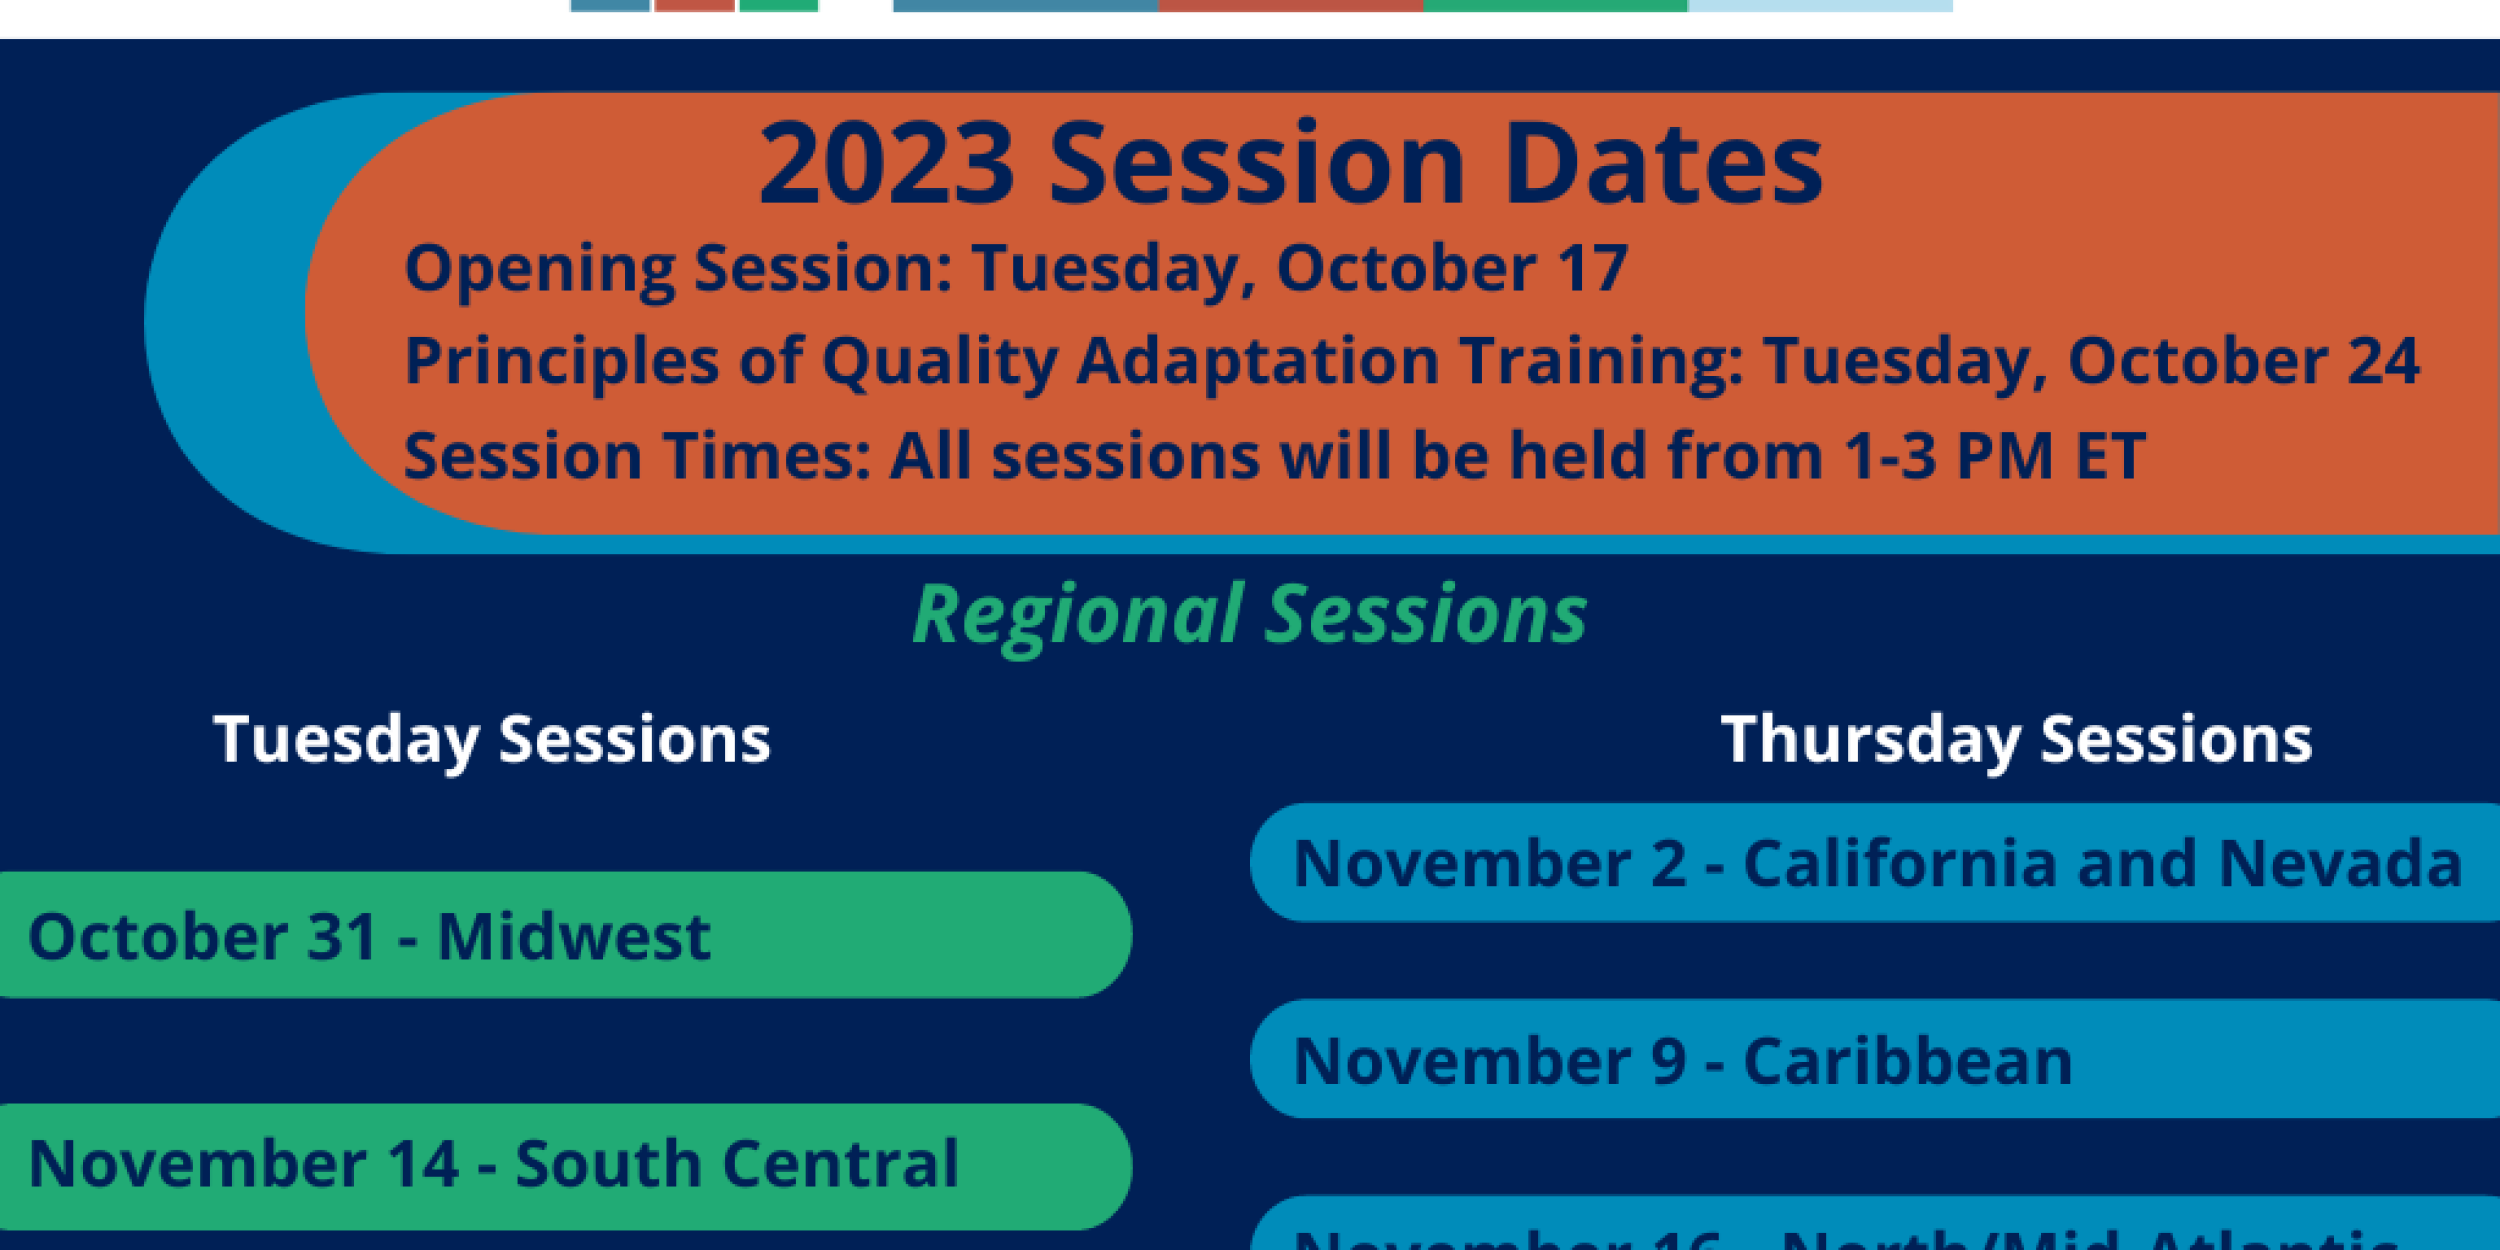 Informative graphic describing dates and focuses of sessions within the academy. Image credit: American Society of Adaptation Professionals